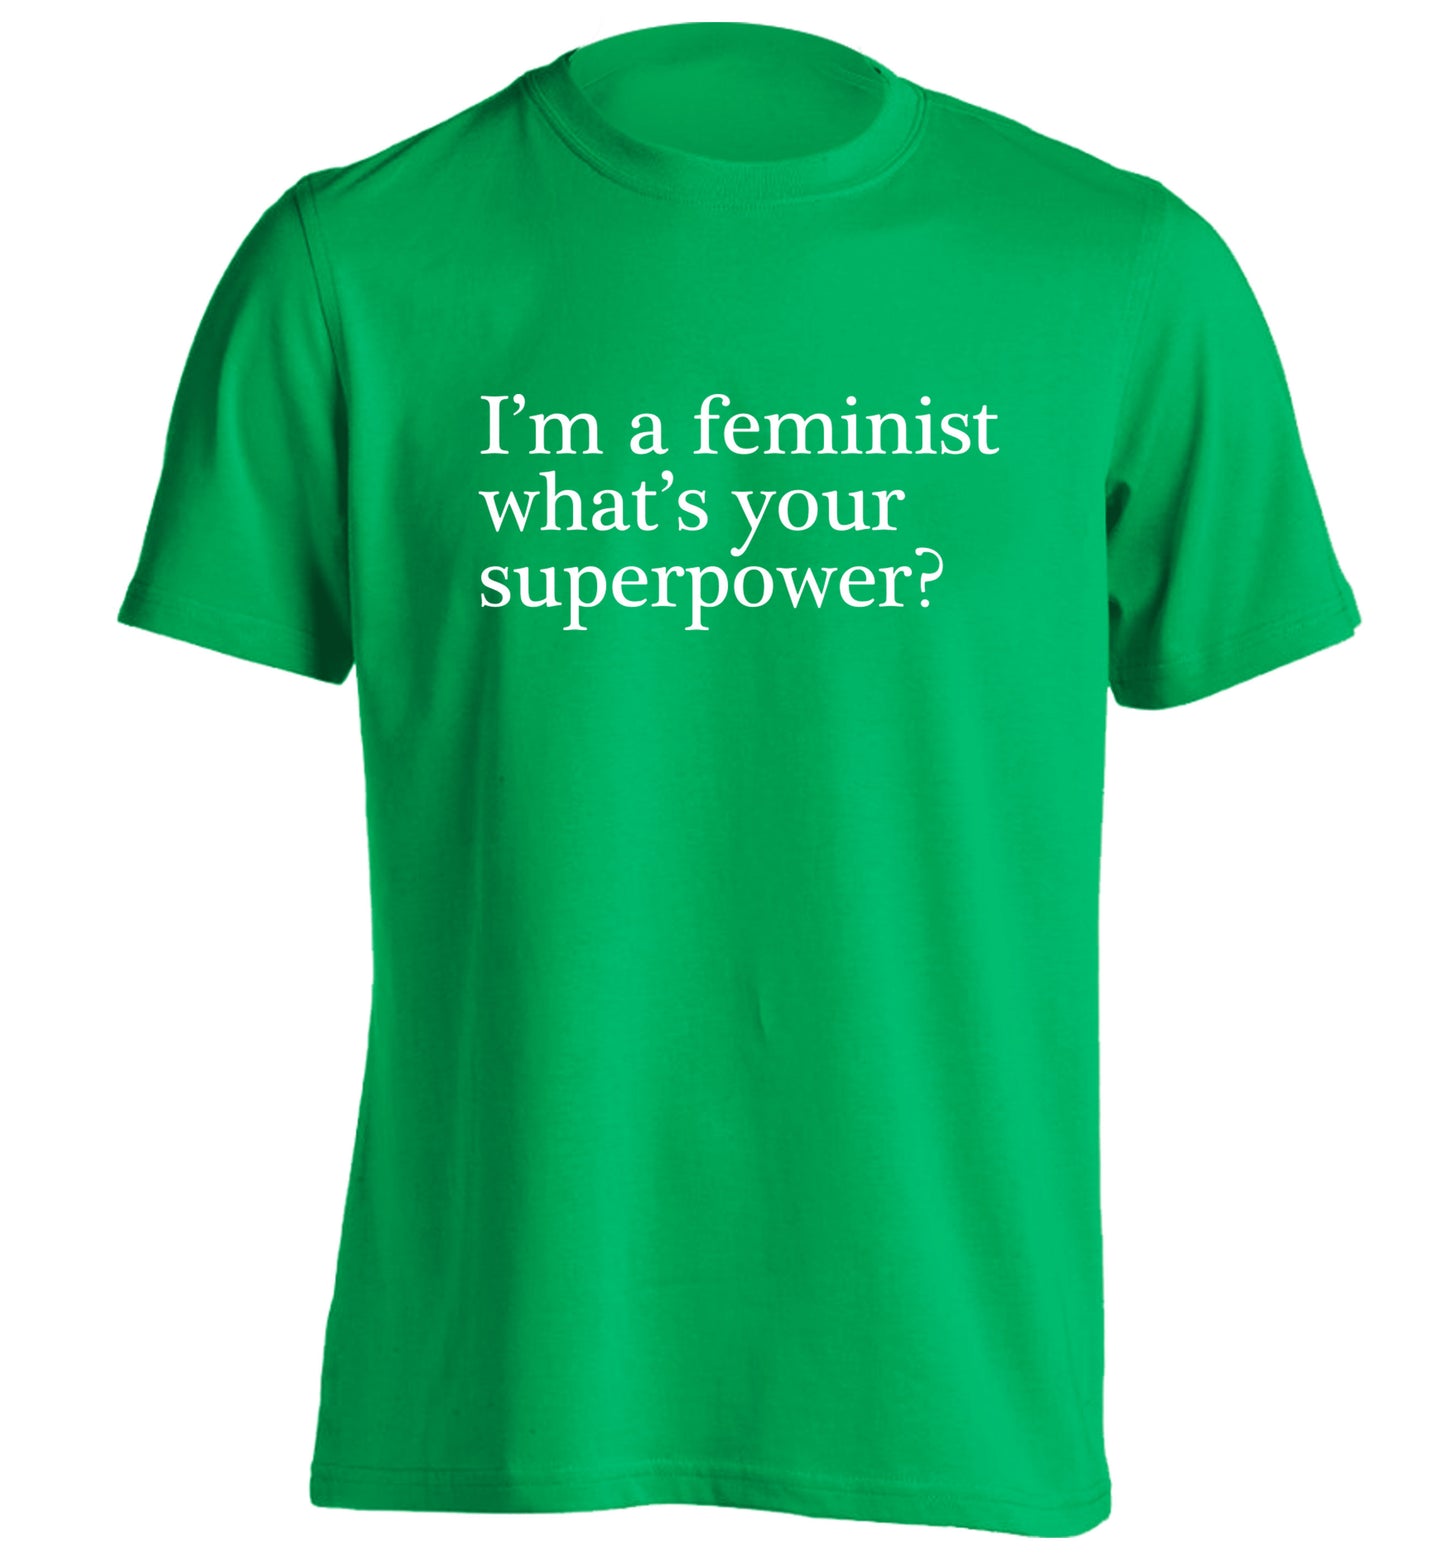 I'm a feminist what's your superpower? adults unisex green Tshirt 2XL